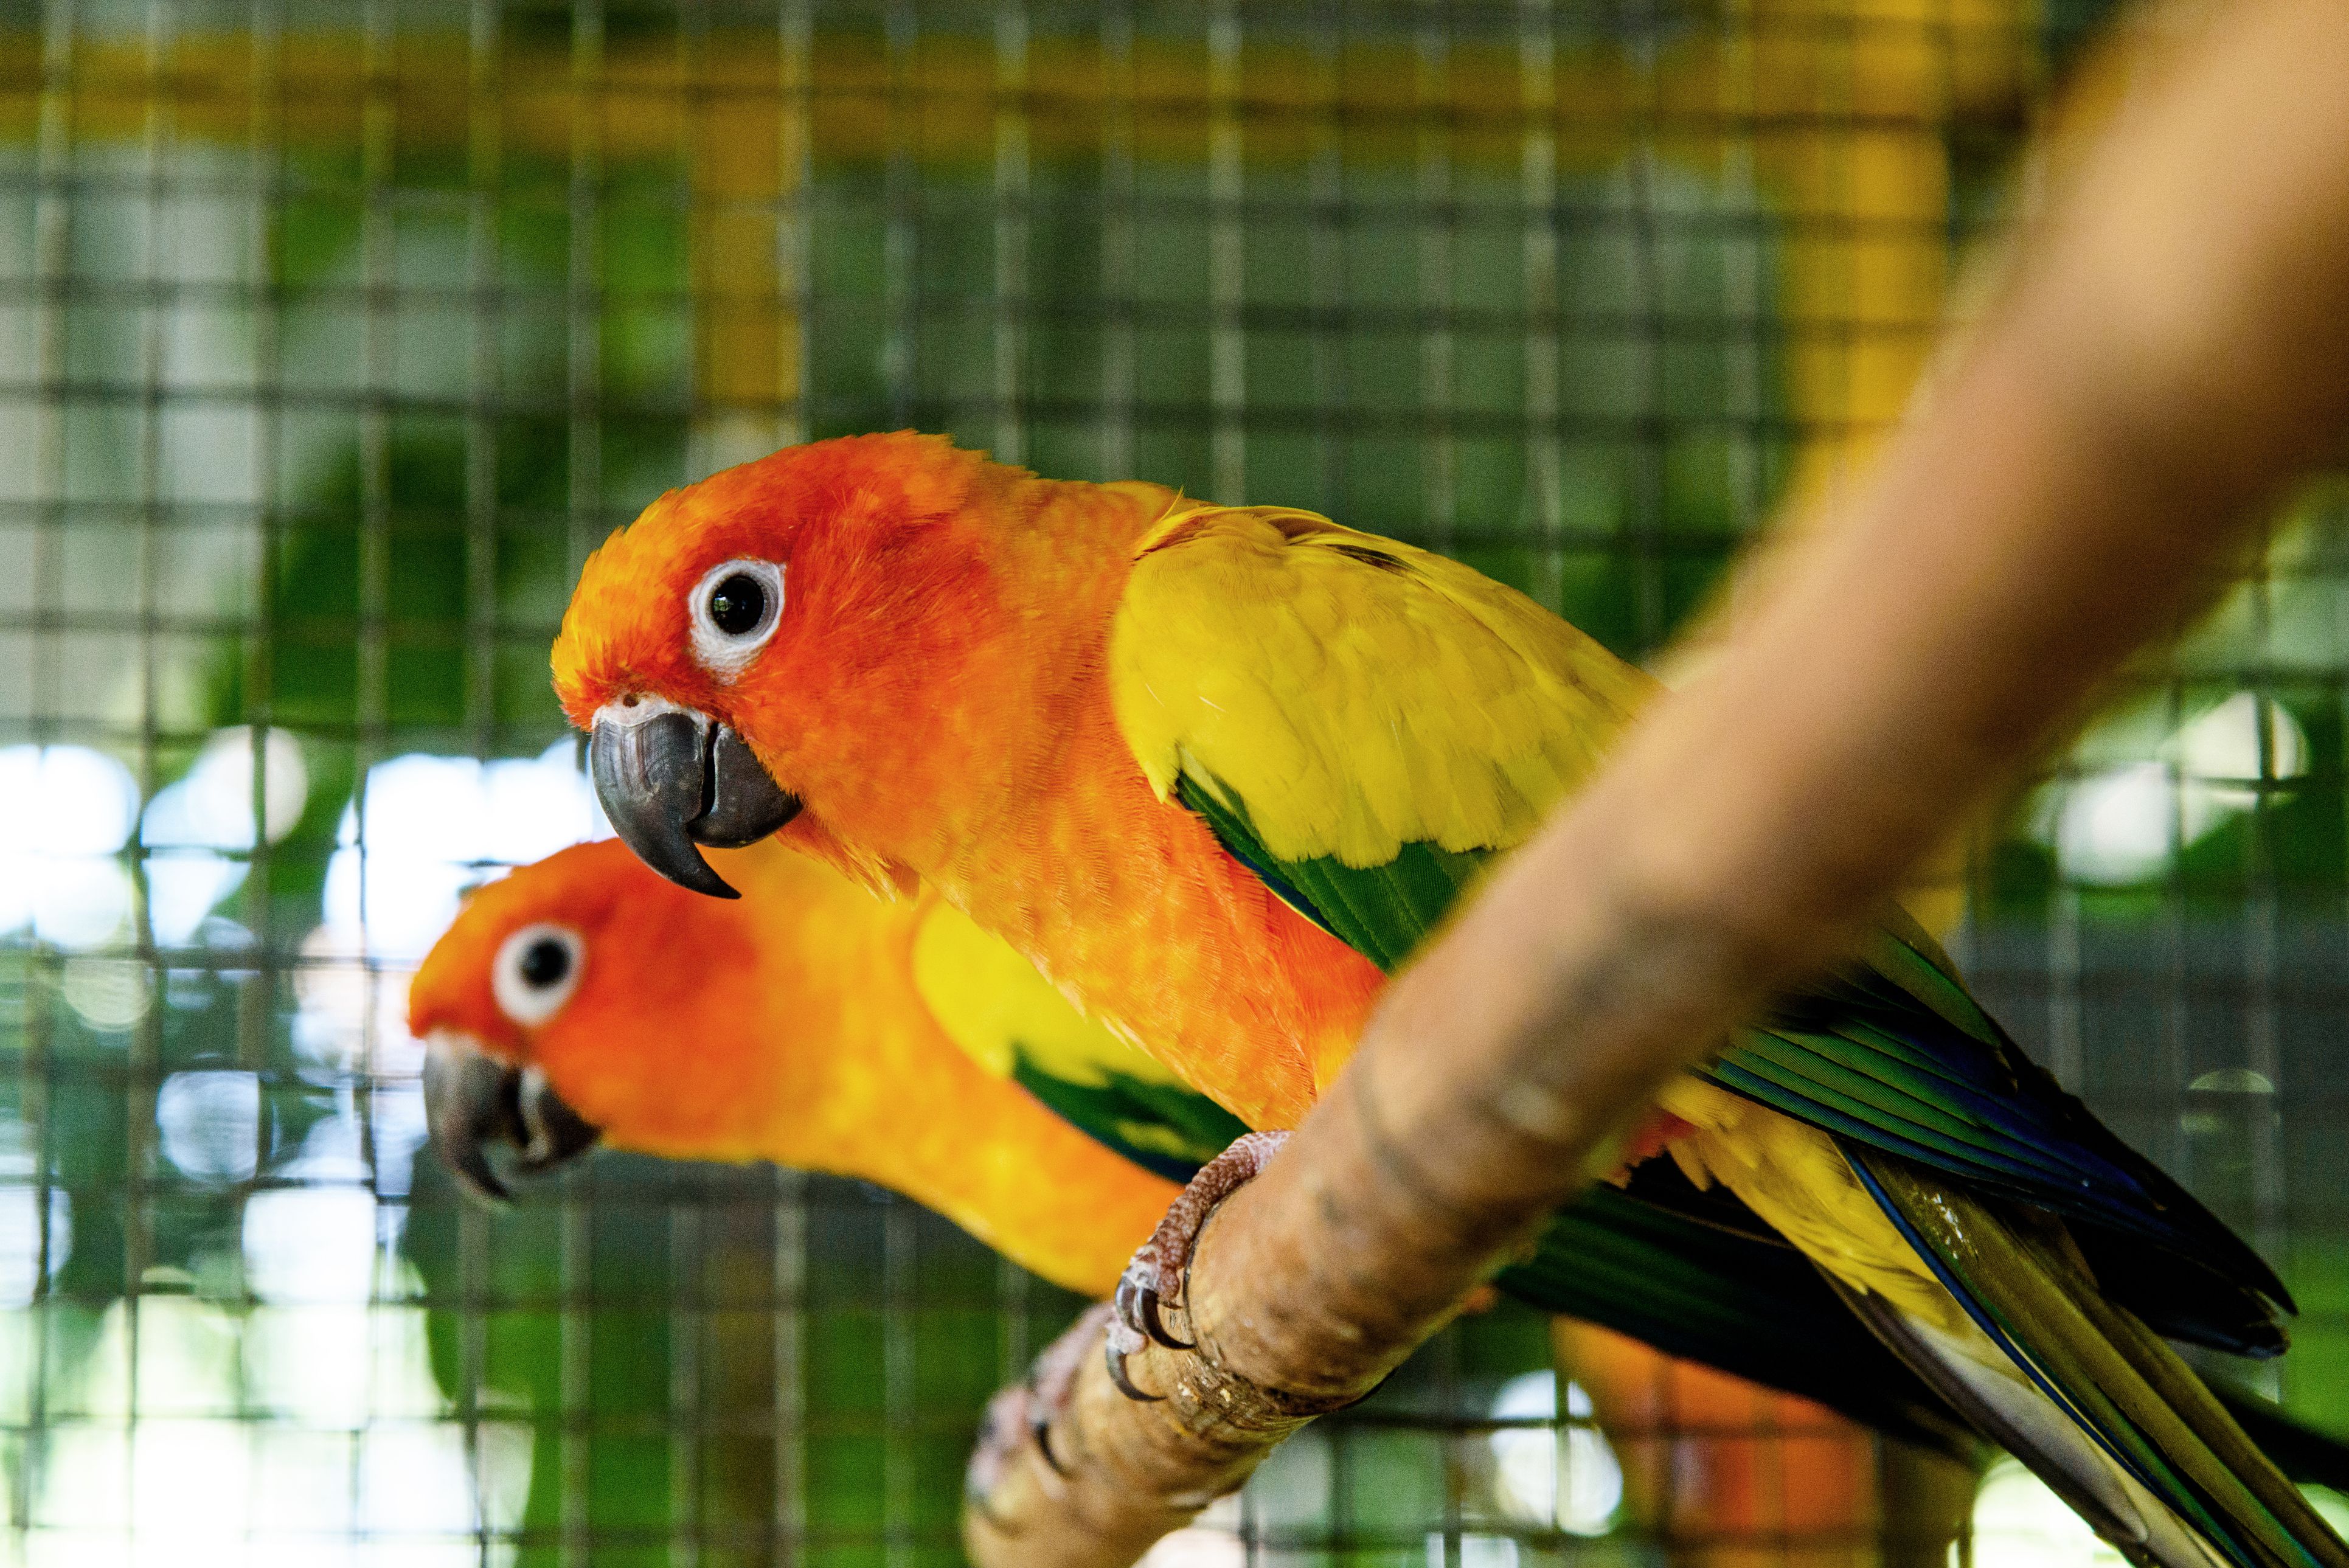 Close-Up Of a pair of Sun Conure parrots Perching On Branch In Birdcage.